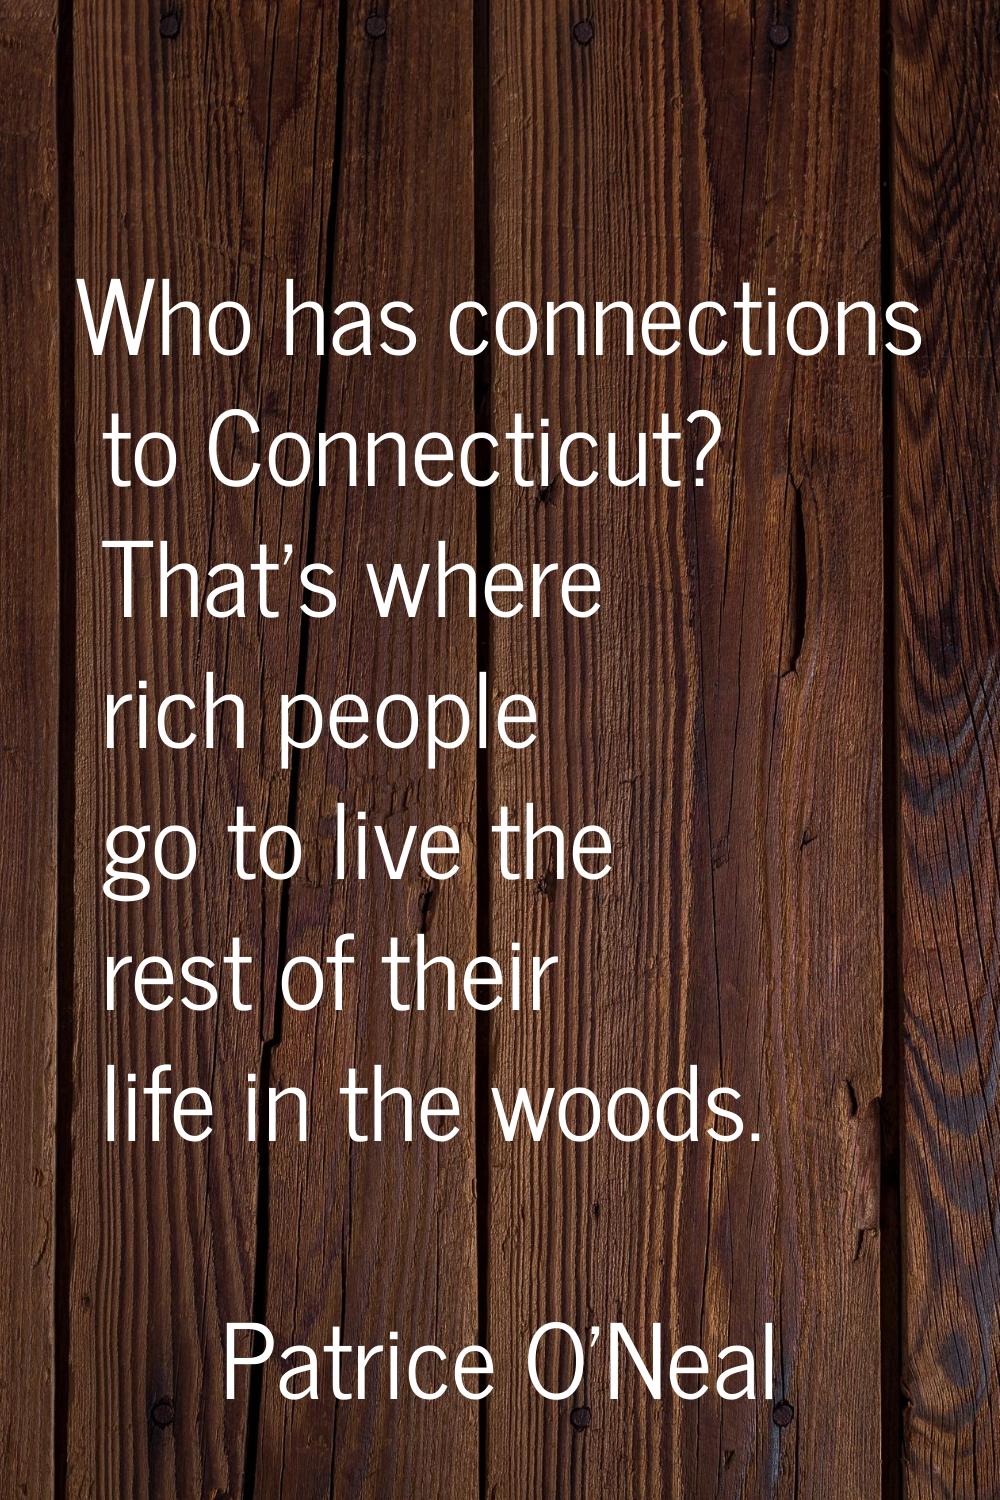 Who has connections to Connecticut? That's where rich people go to live the rest of their life in t